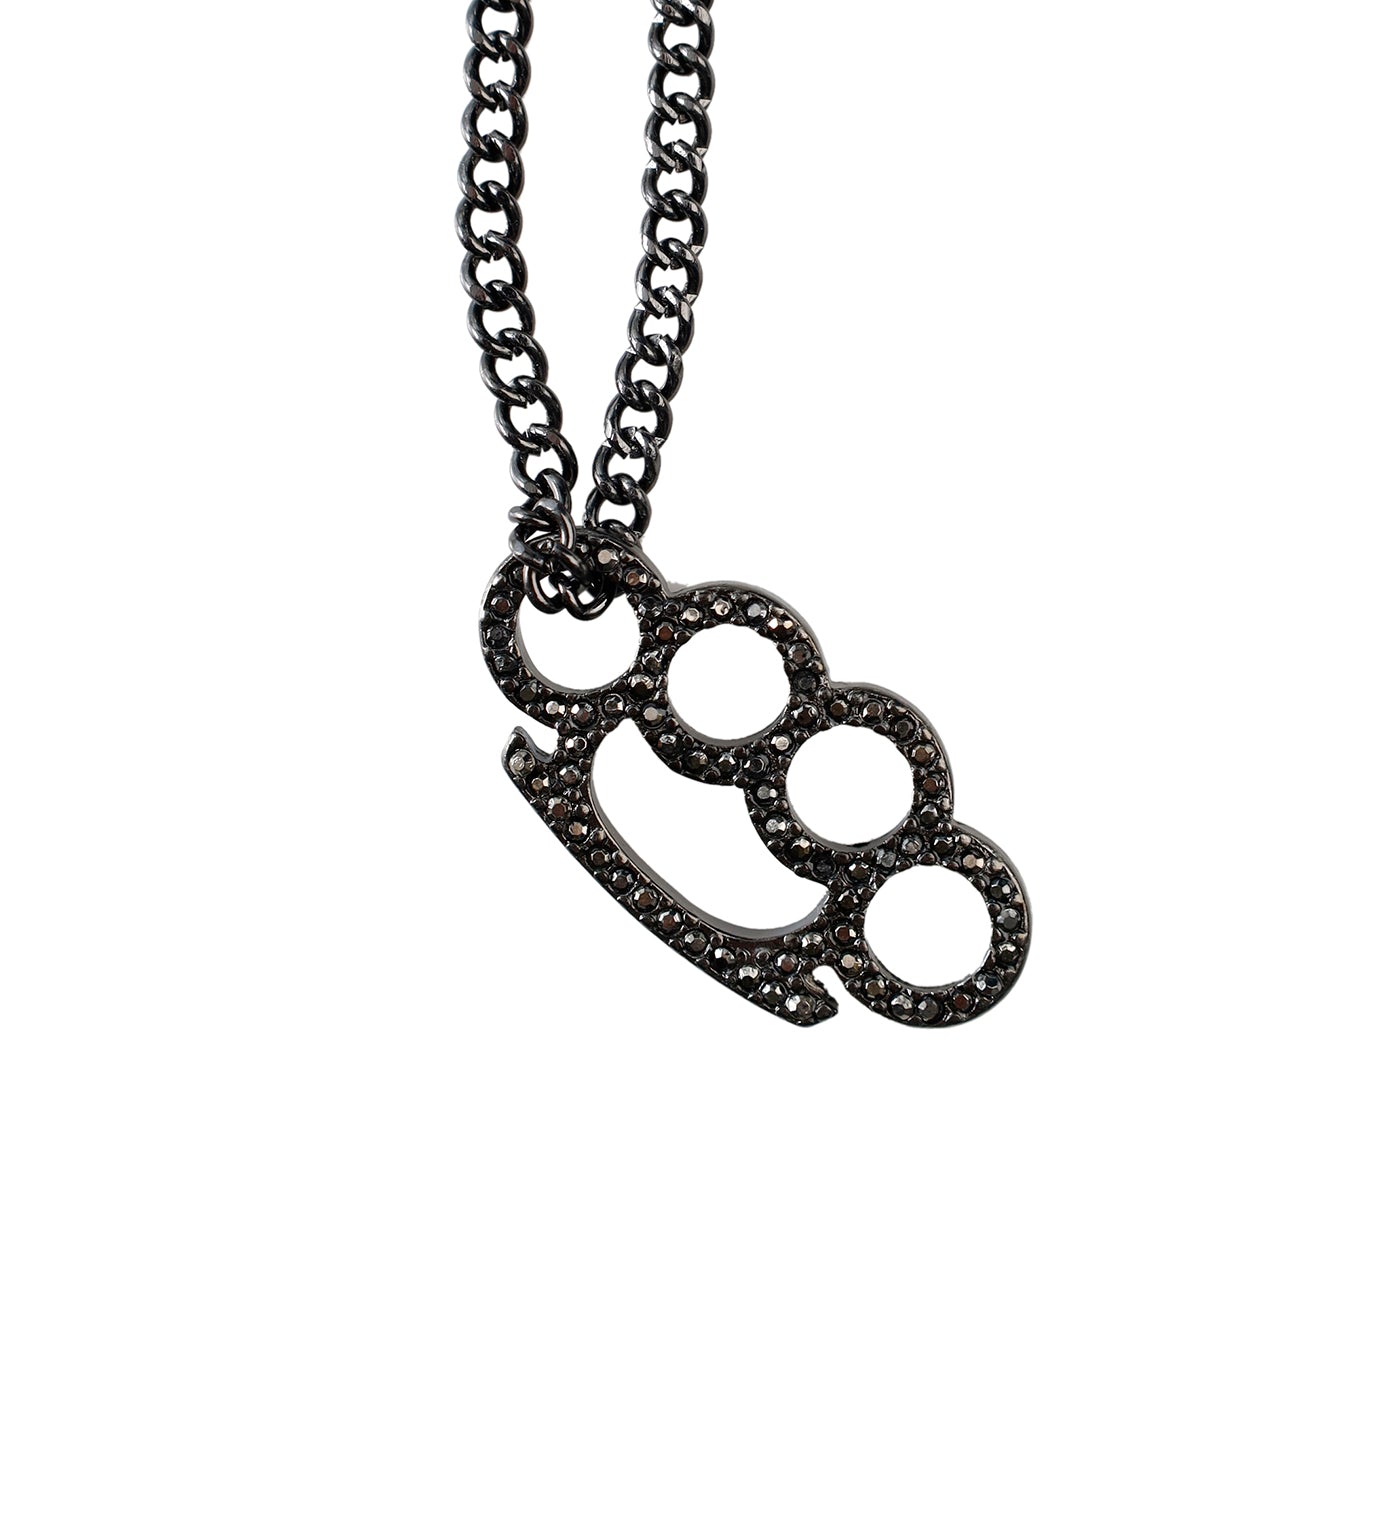 Buy Knuckle Duster Necklaces Online in India - Etsy